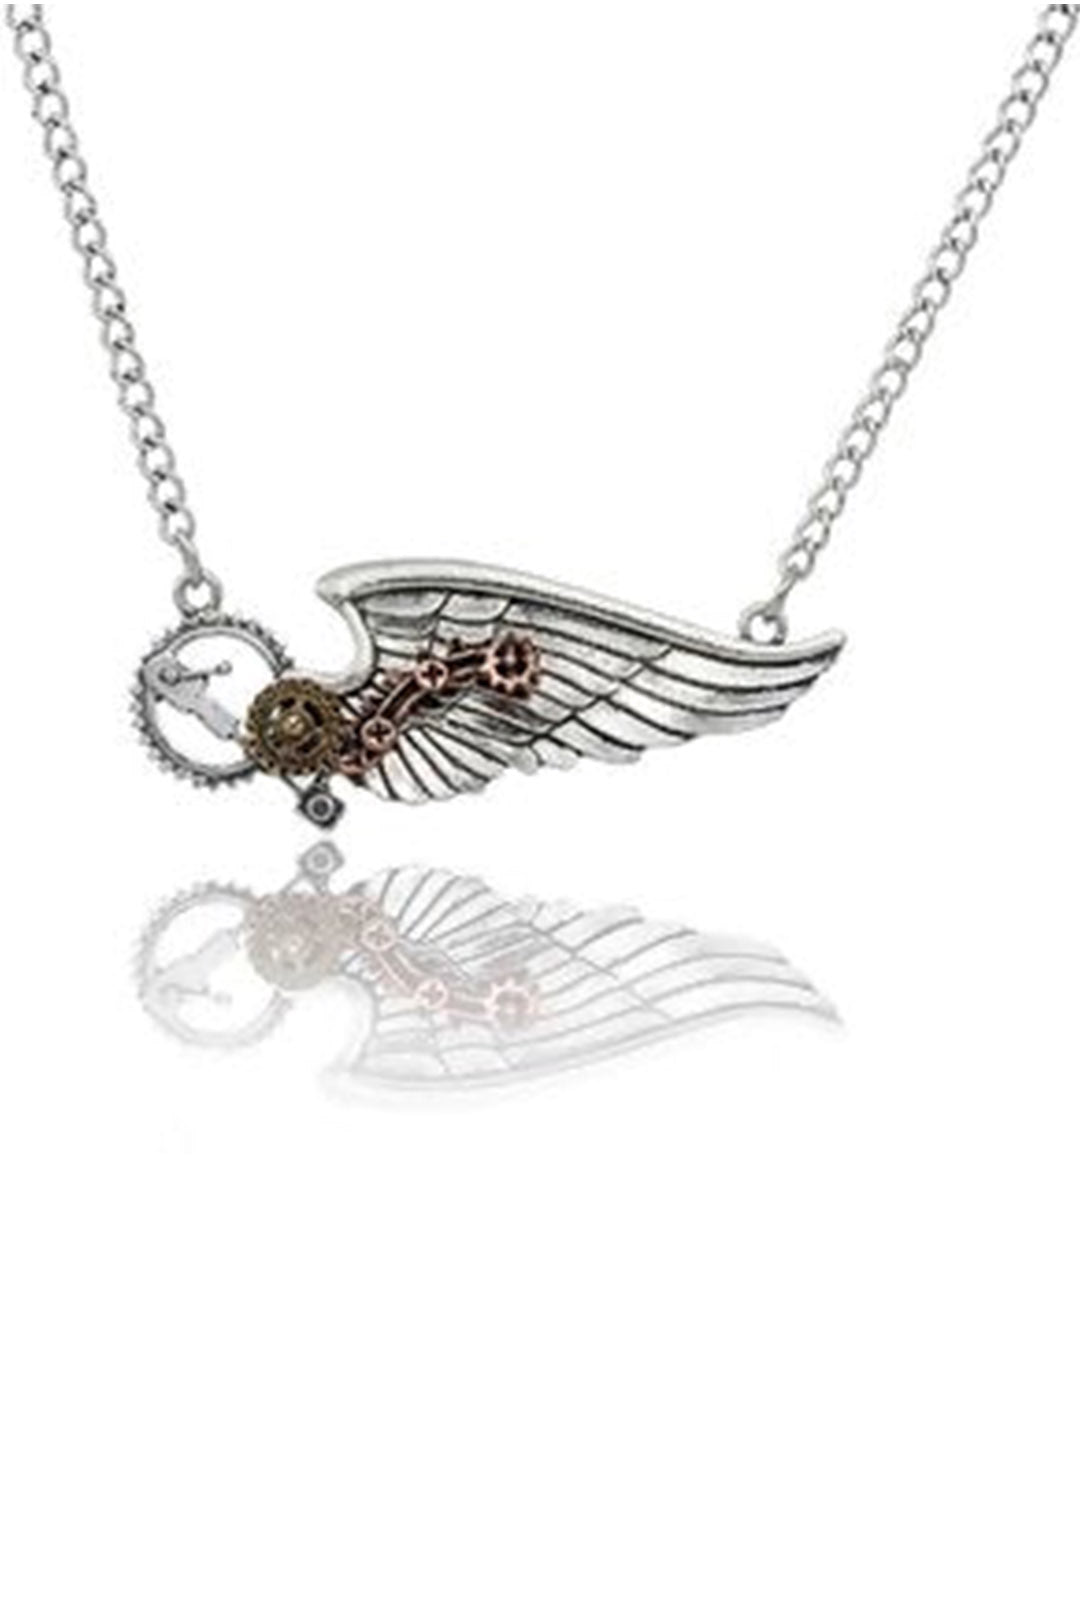 Silver Wing Steampunk Necklace (C)